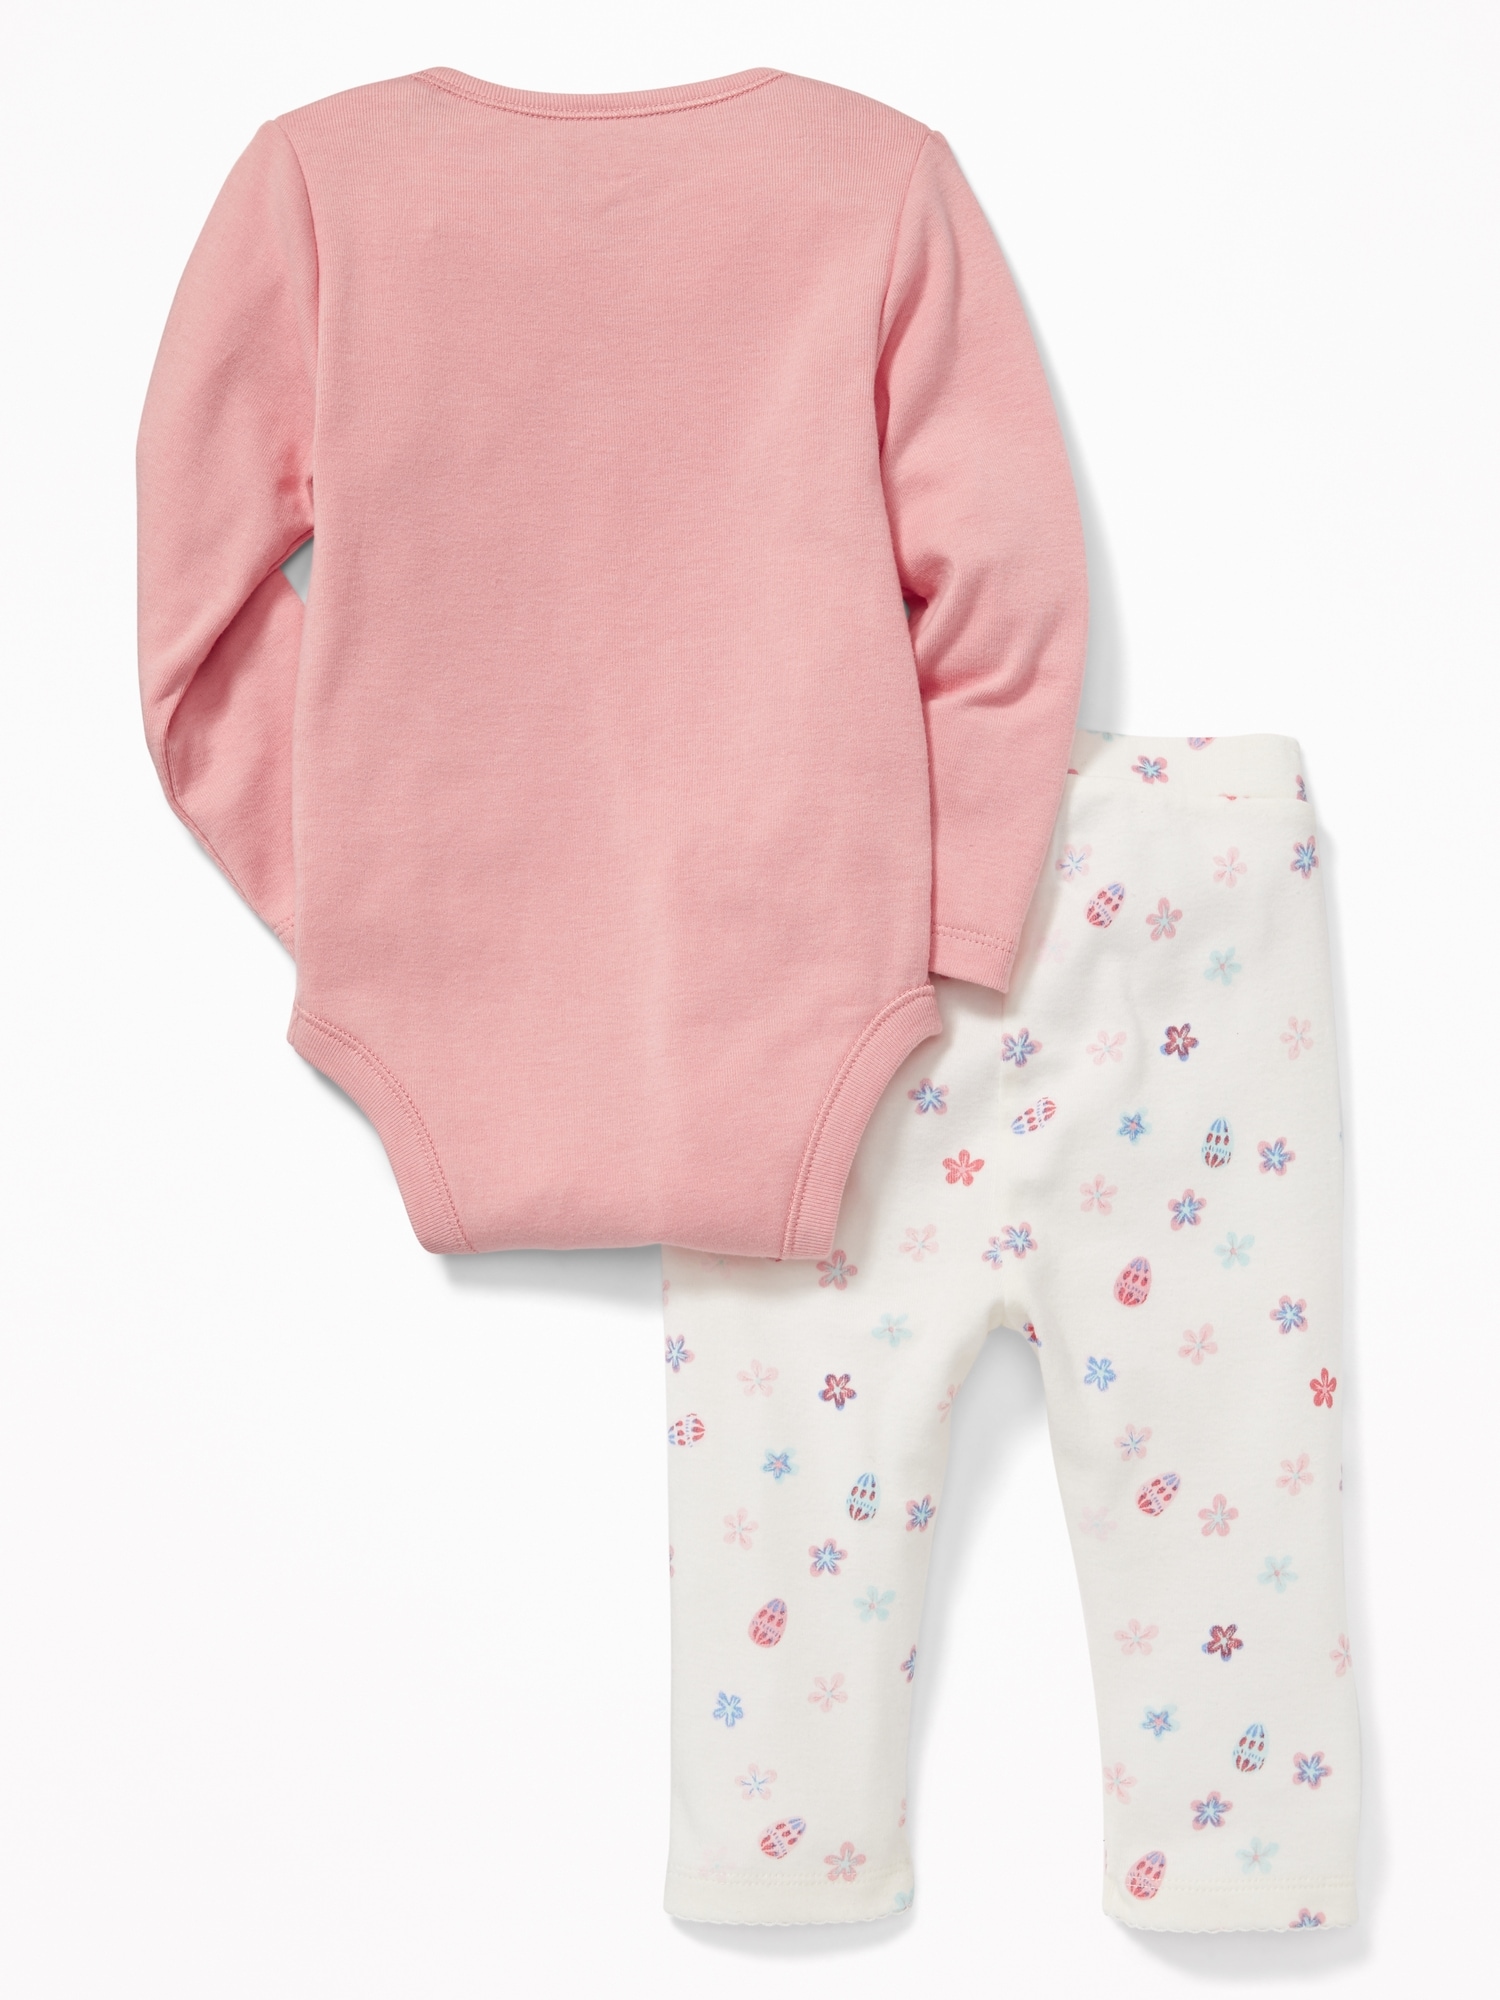 Graphic Bodysuit & Printed Jersey Pants Set for Baby | Old Navy